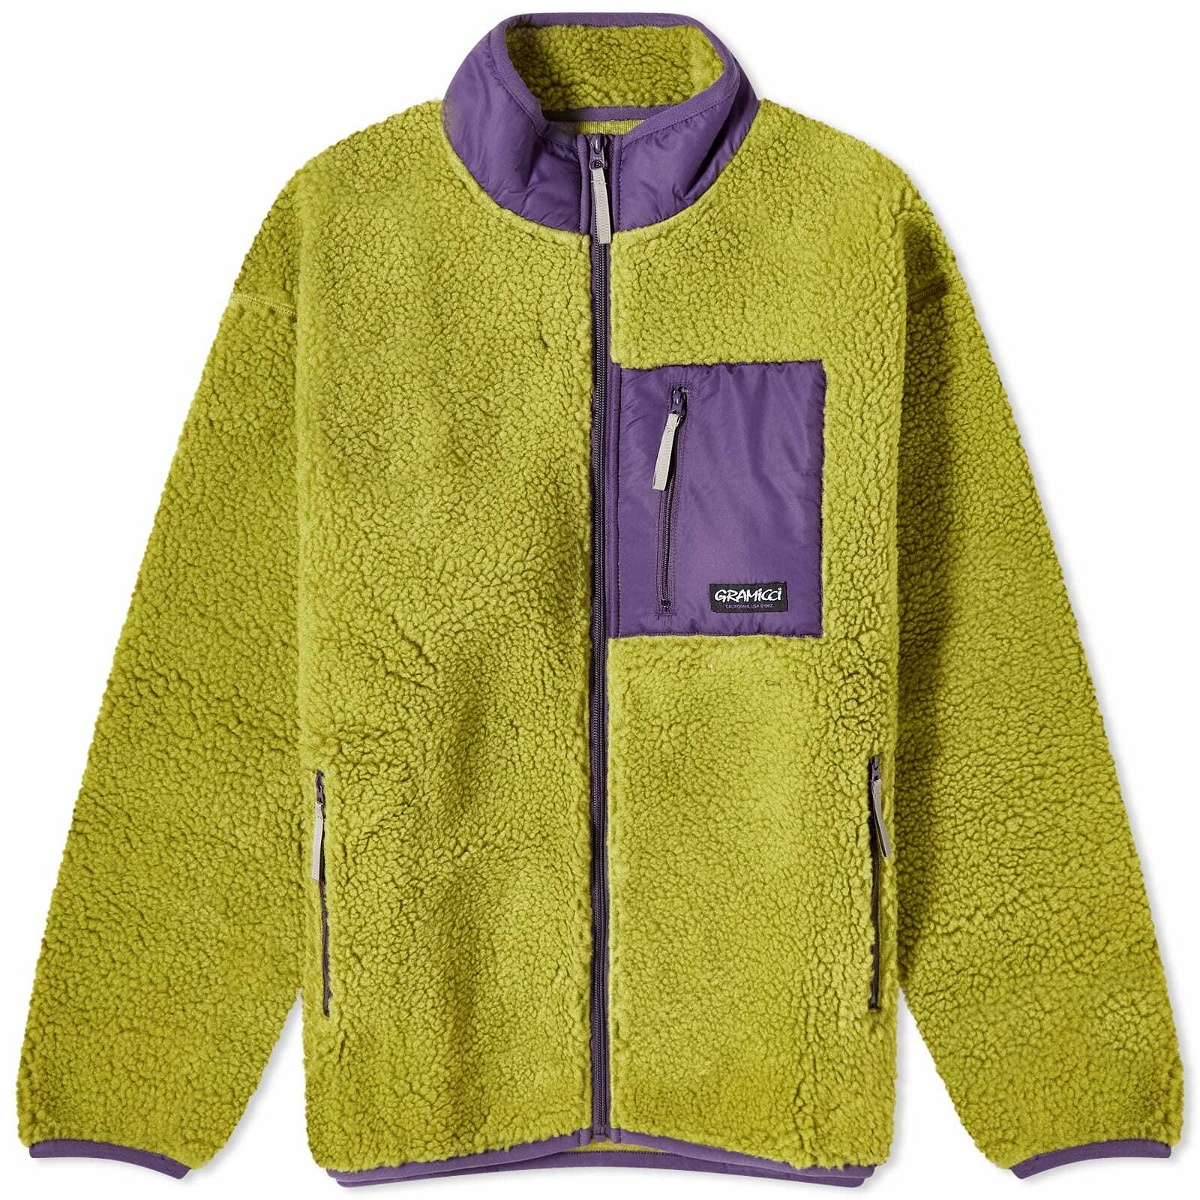 Gramicci Men's Sherpa Jacket in Dusted Lime Gramicci